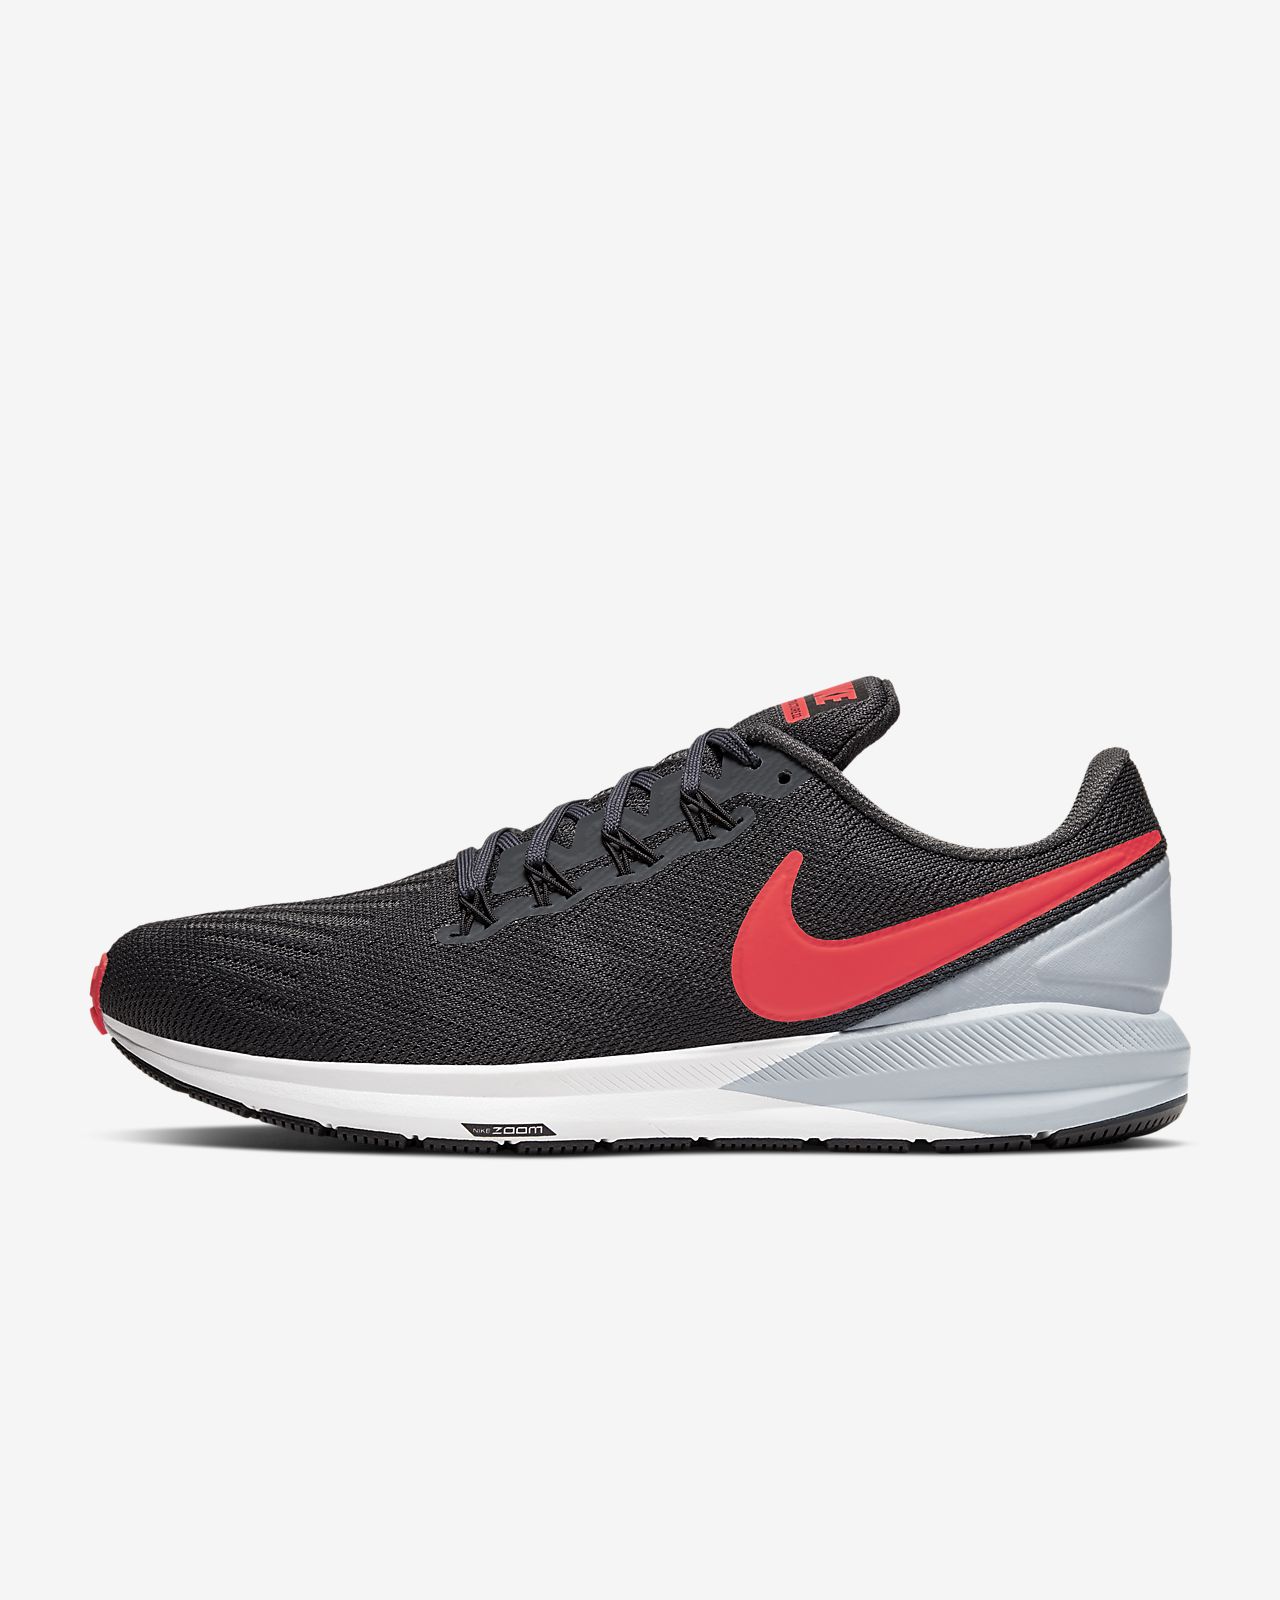 nike structure 15 mens